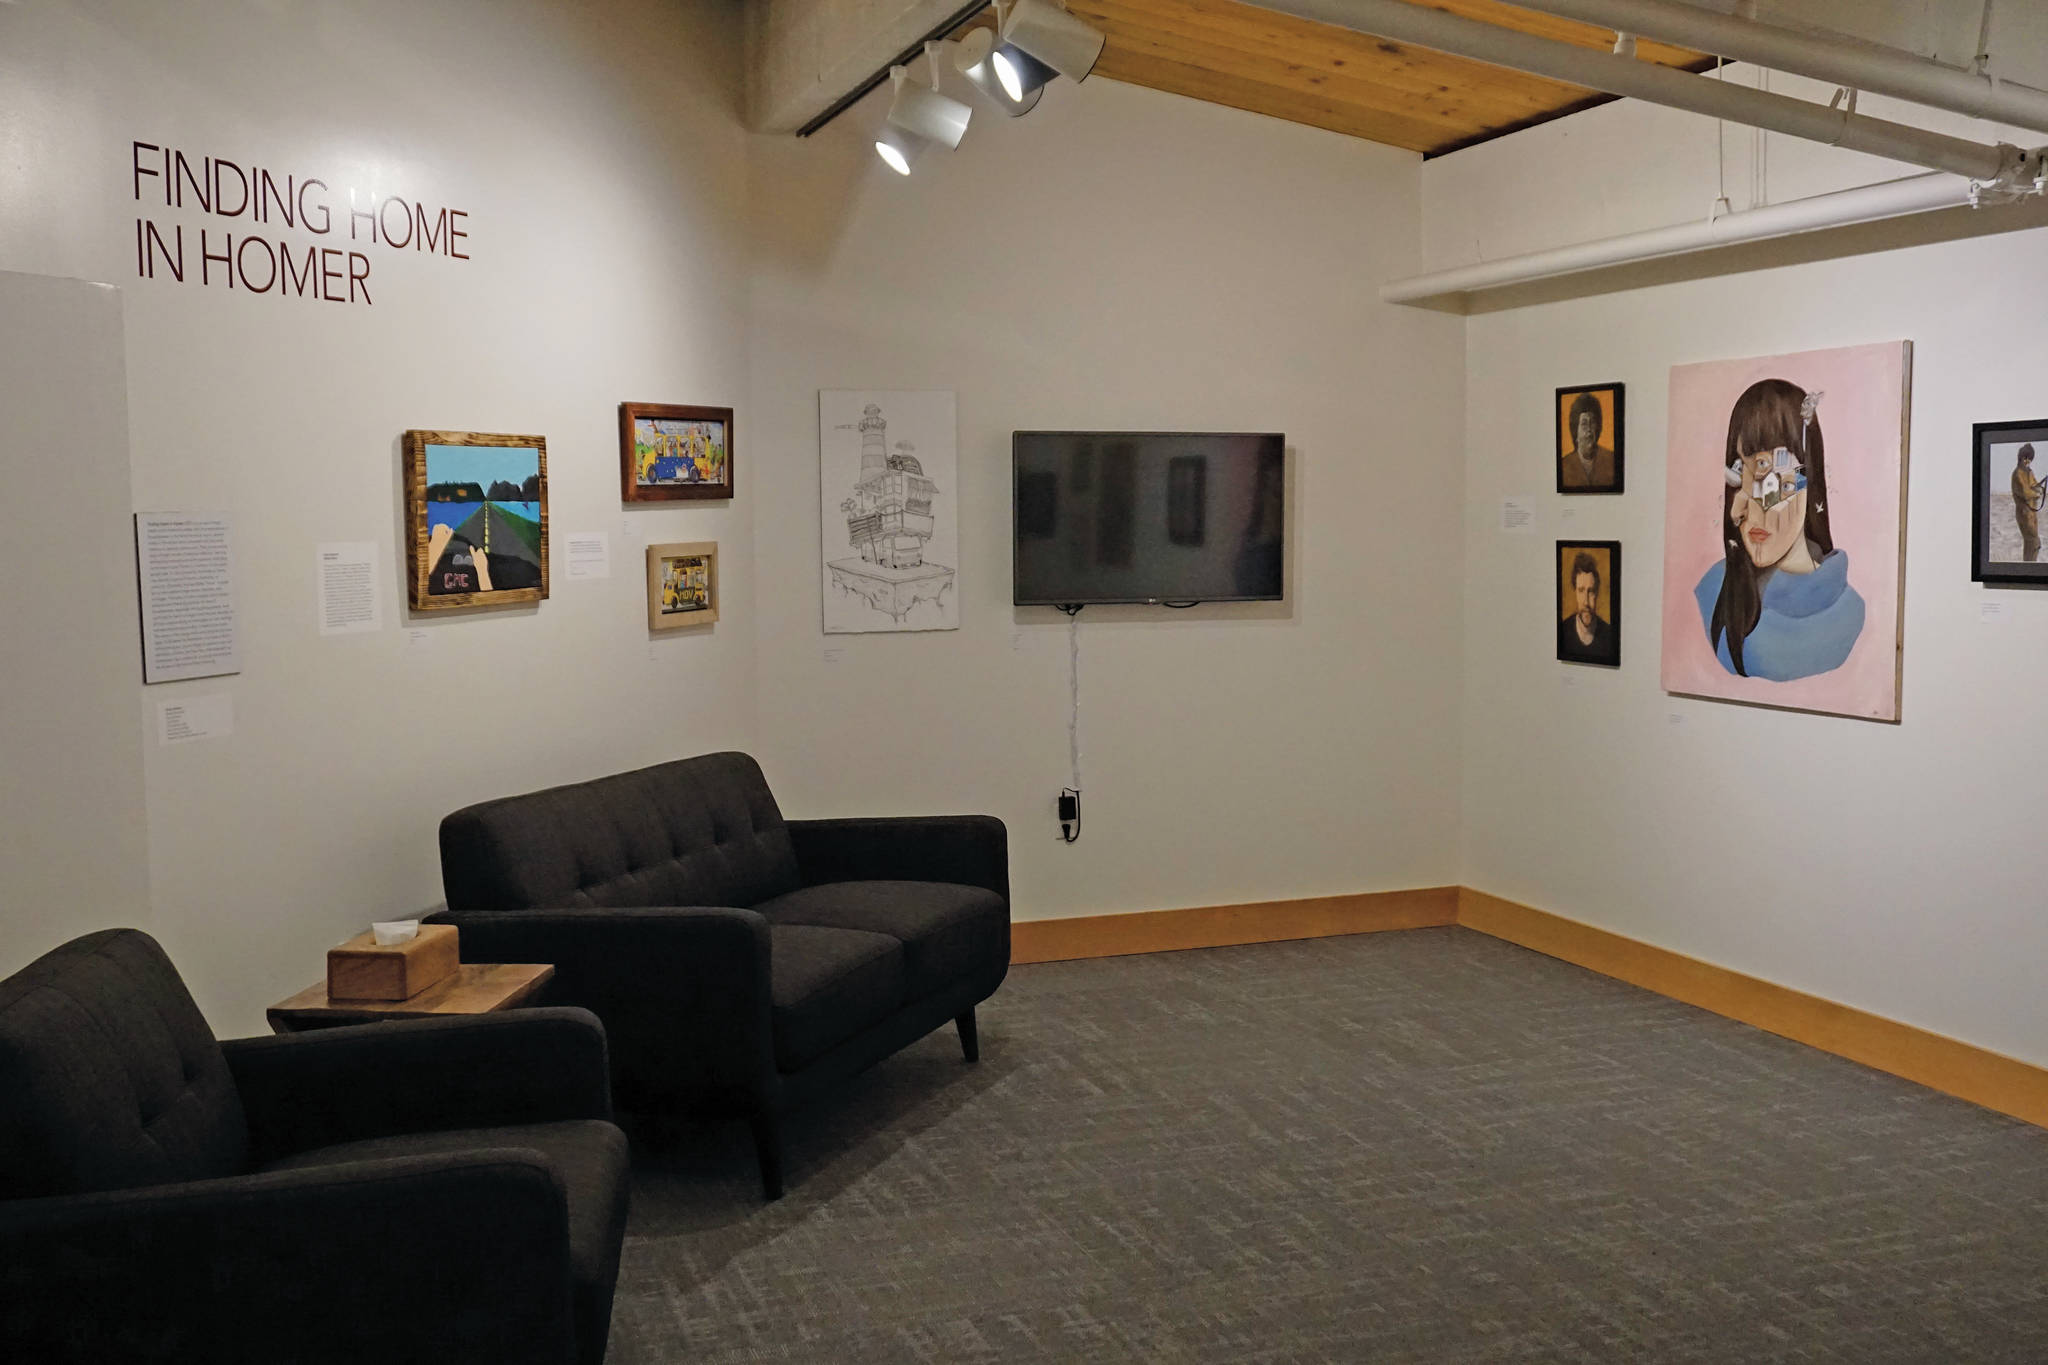 The exhibit for “Finding Home in Homer” includes comfortable couches to sit and look at the art made by Alaska youth, as seen here on Tuesday, May 18, 2021, in Homer, Alaska. (Photo by Michael Armstrong/Homer News)